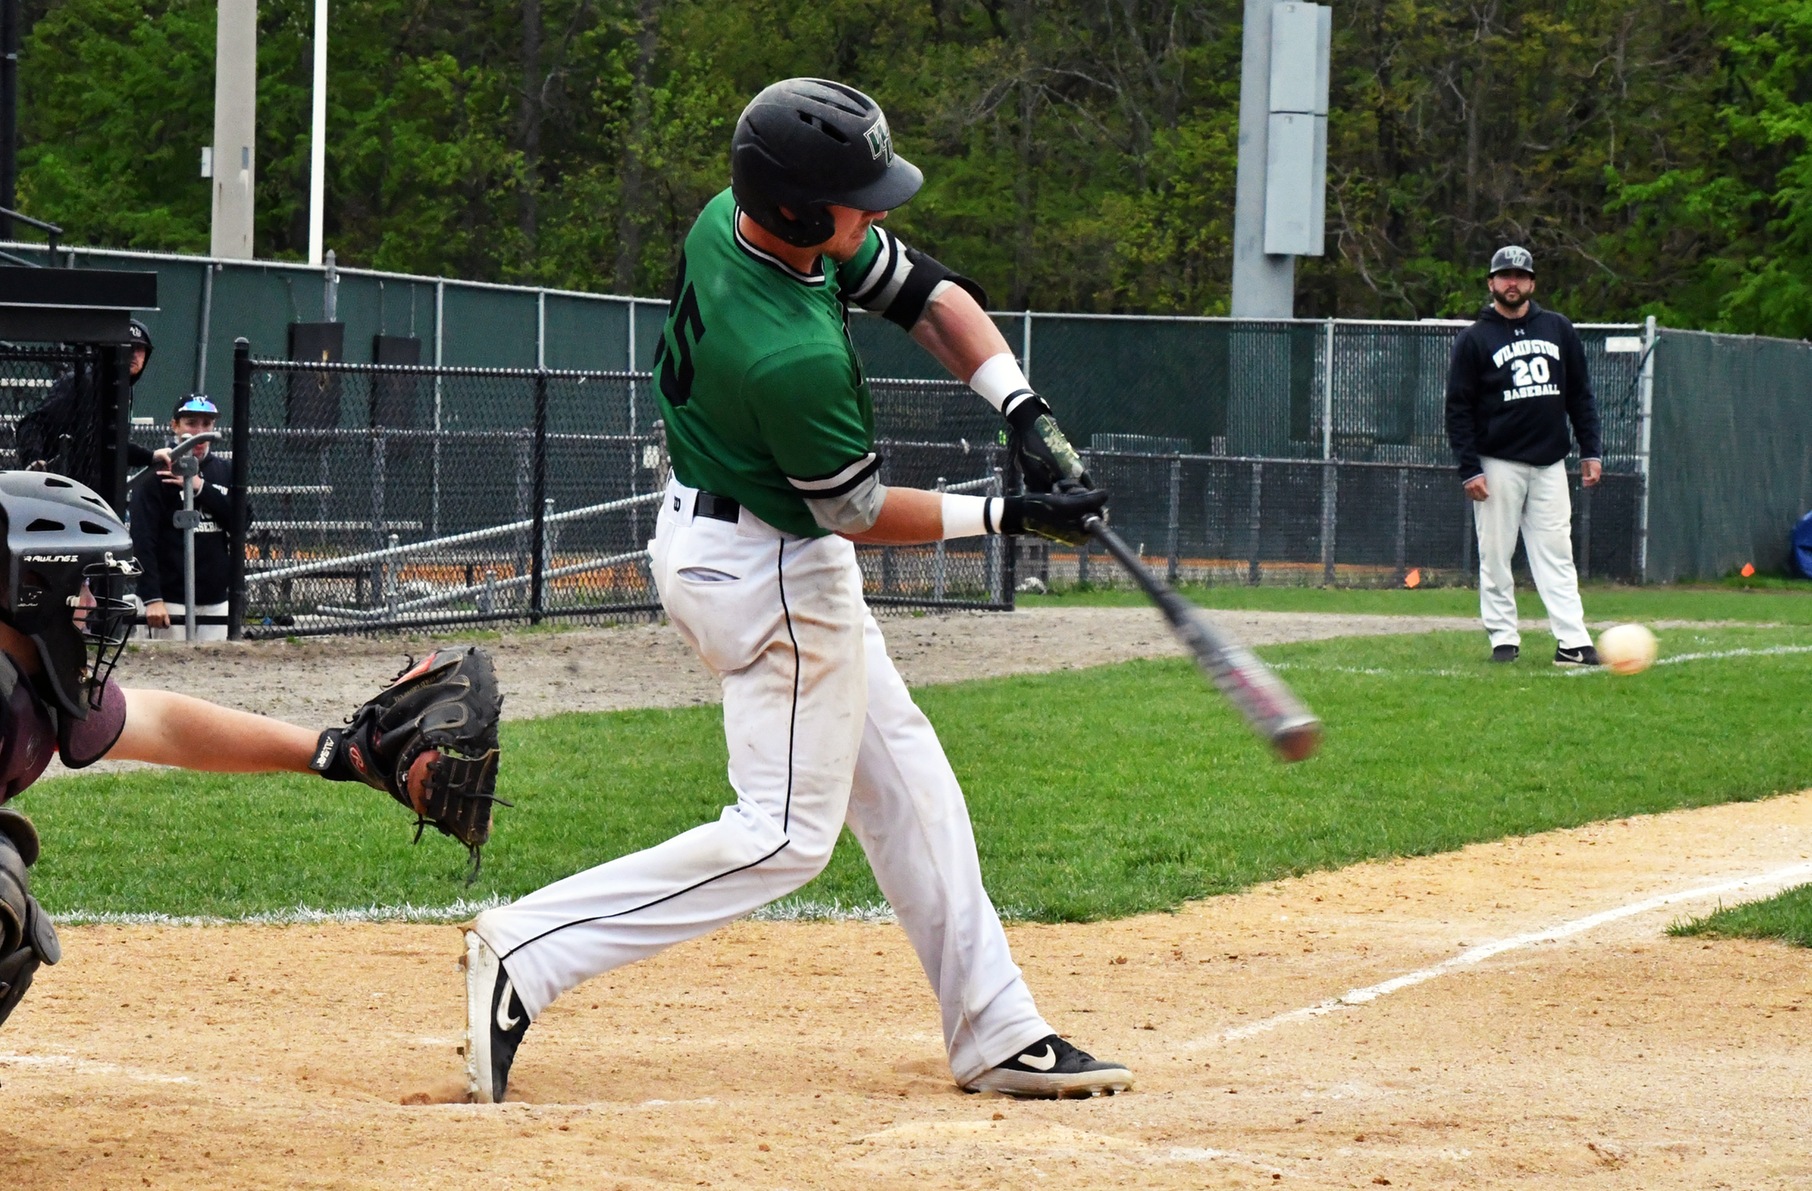 Copyright 2019; Wilmington University. All rights reserved. Photo of Luke Johnson who hit the go-ahead three-run homer in the seventh against Dominican. Taken by Ellen O'Brien, CACC.